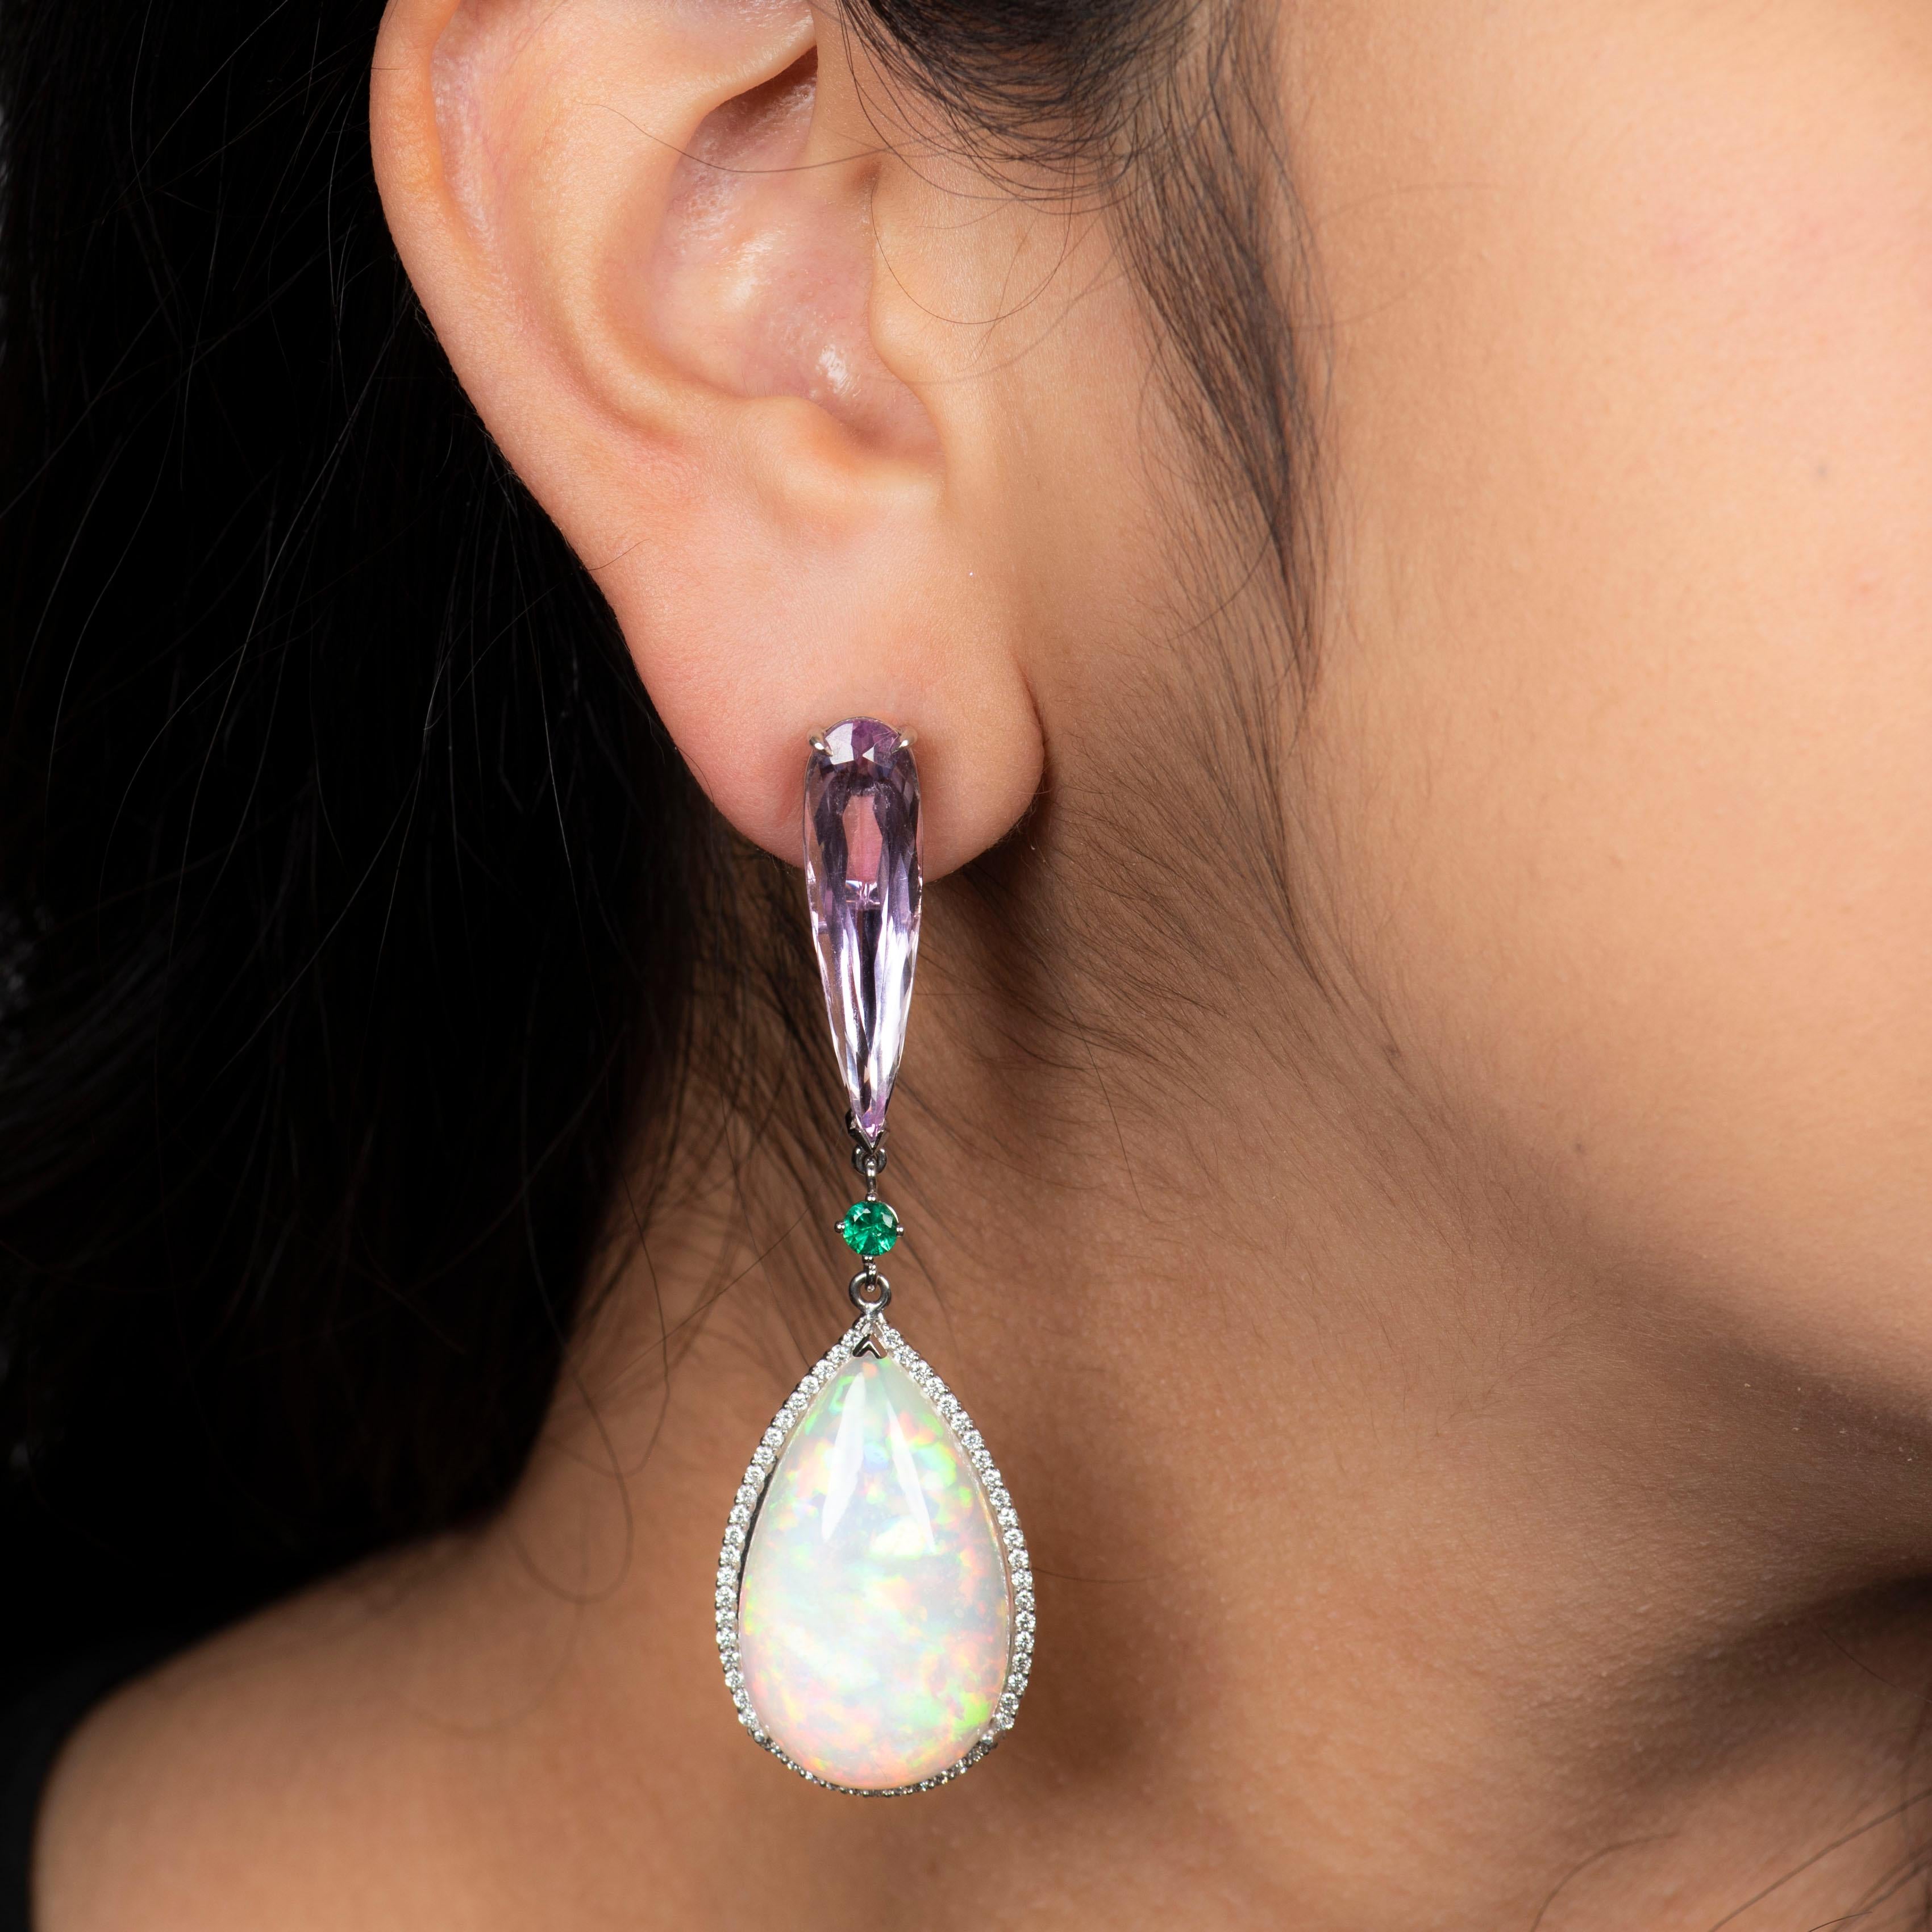 Custom, one-of-a-kind 38.28 Carat total weight of pear shaped opals with 0.90 carats of round brilliant cut diamonds surrounding the opals with omega clip backs. Along with 14.99 carat total weight of  tear drop shaped Pink Beryl (Morganite) & 0.31